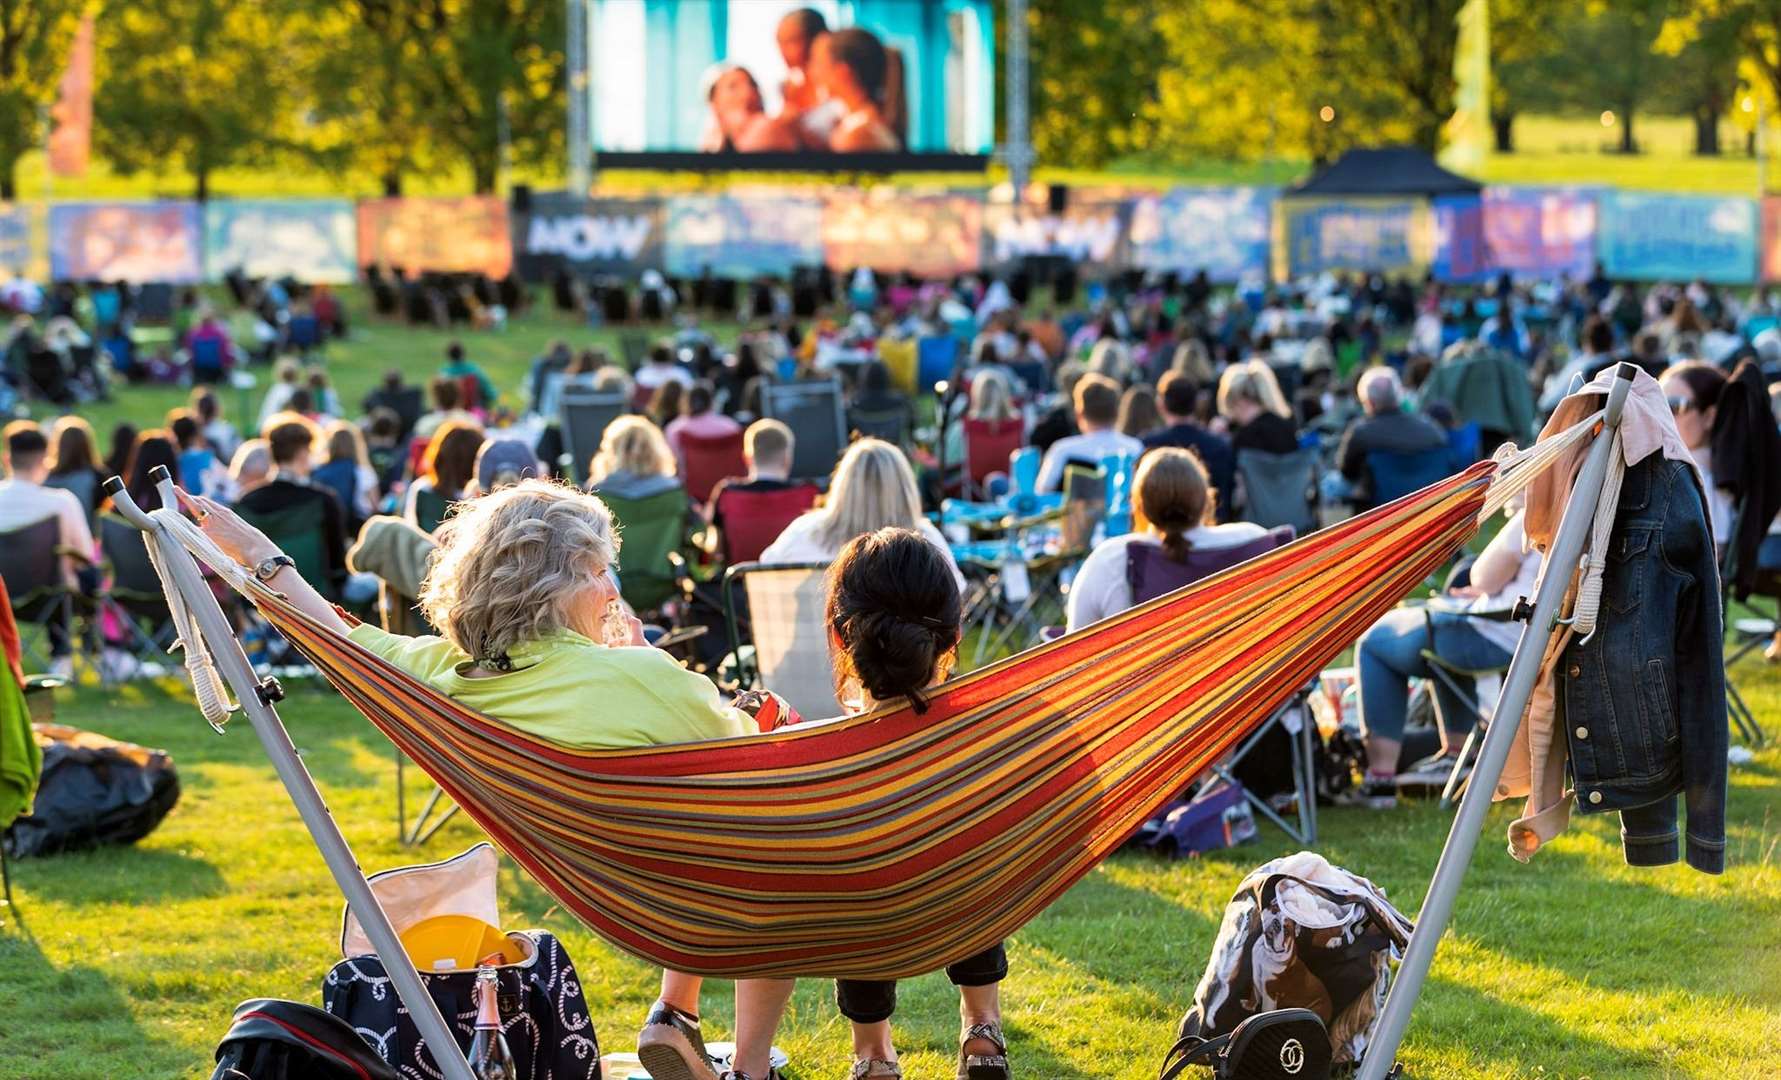 The pop-up screen will be at Cobham Hall in Gravesend for four nights in August. Picture: Adventure Cinema